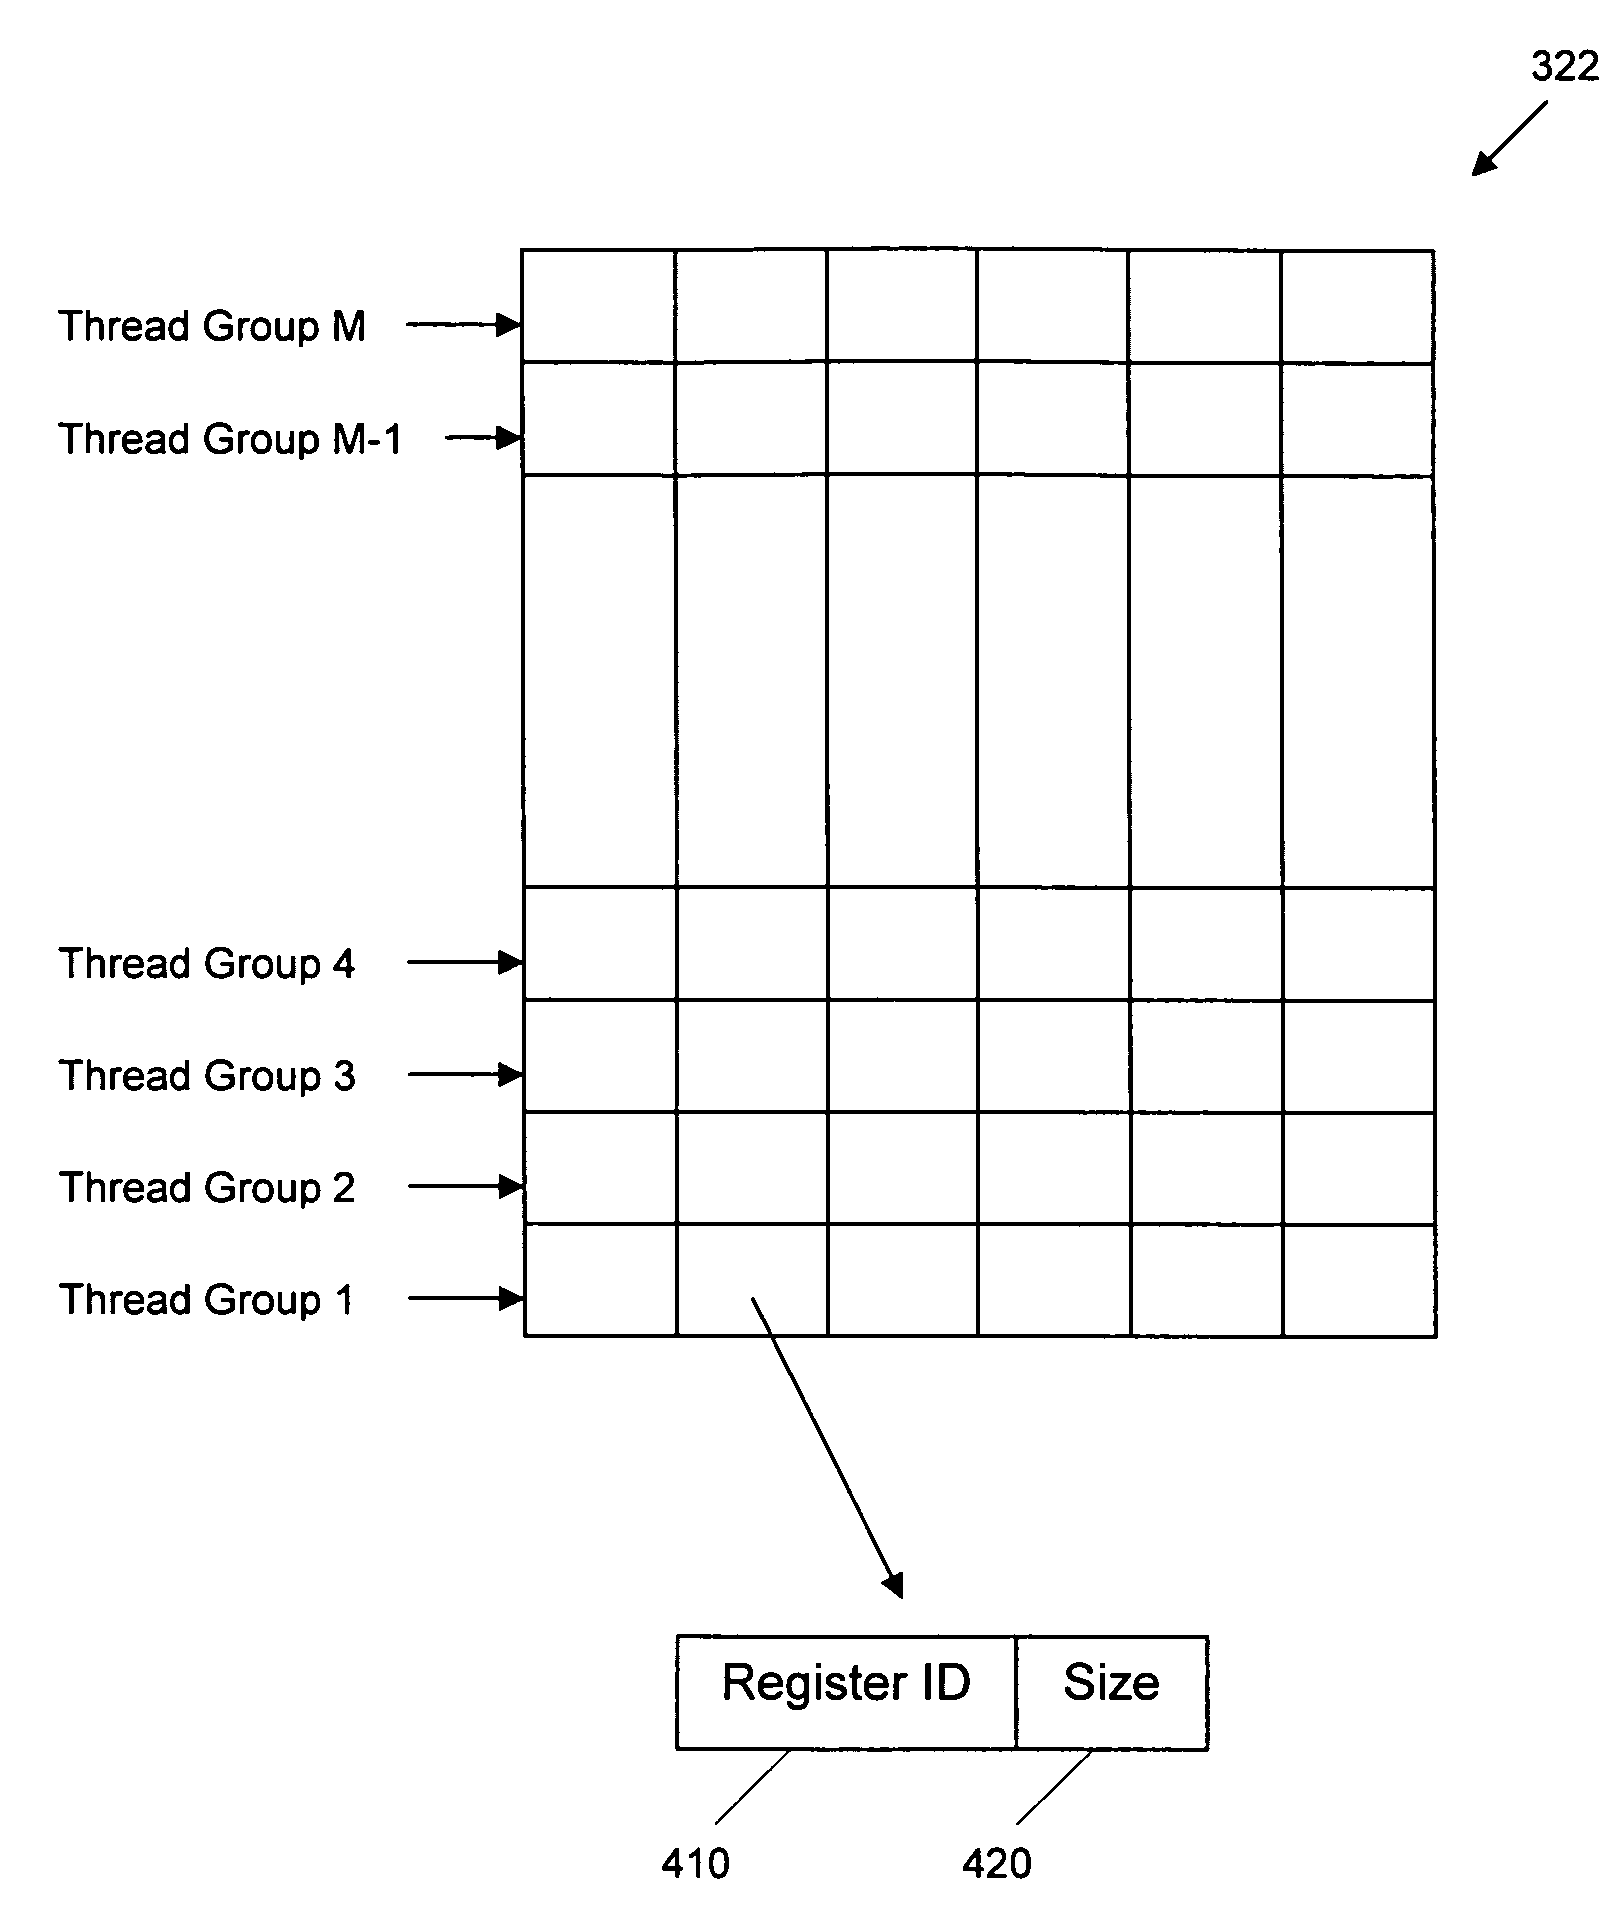 Tracking register usage during multithreaded processing using a scoreboard having separate memory regions and storing sequential register size indicators